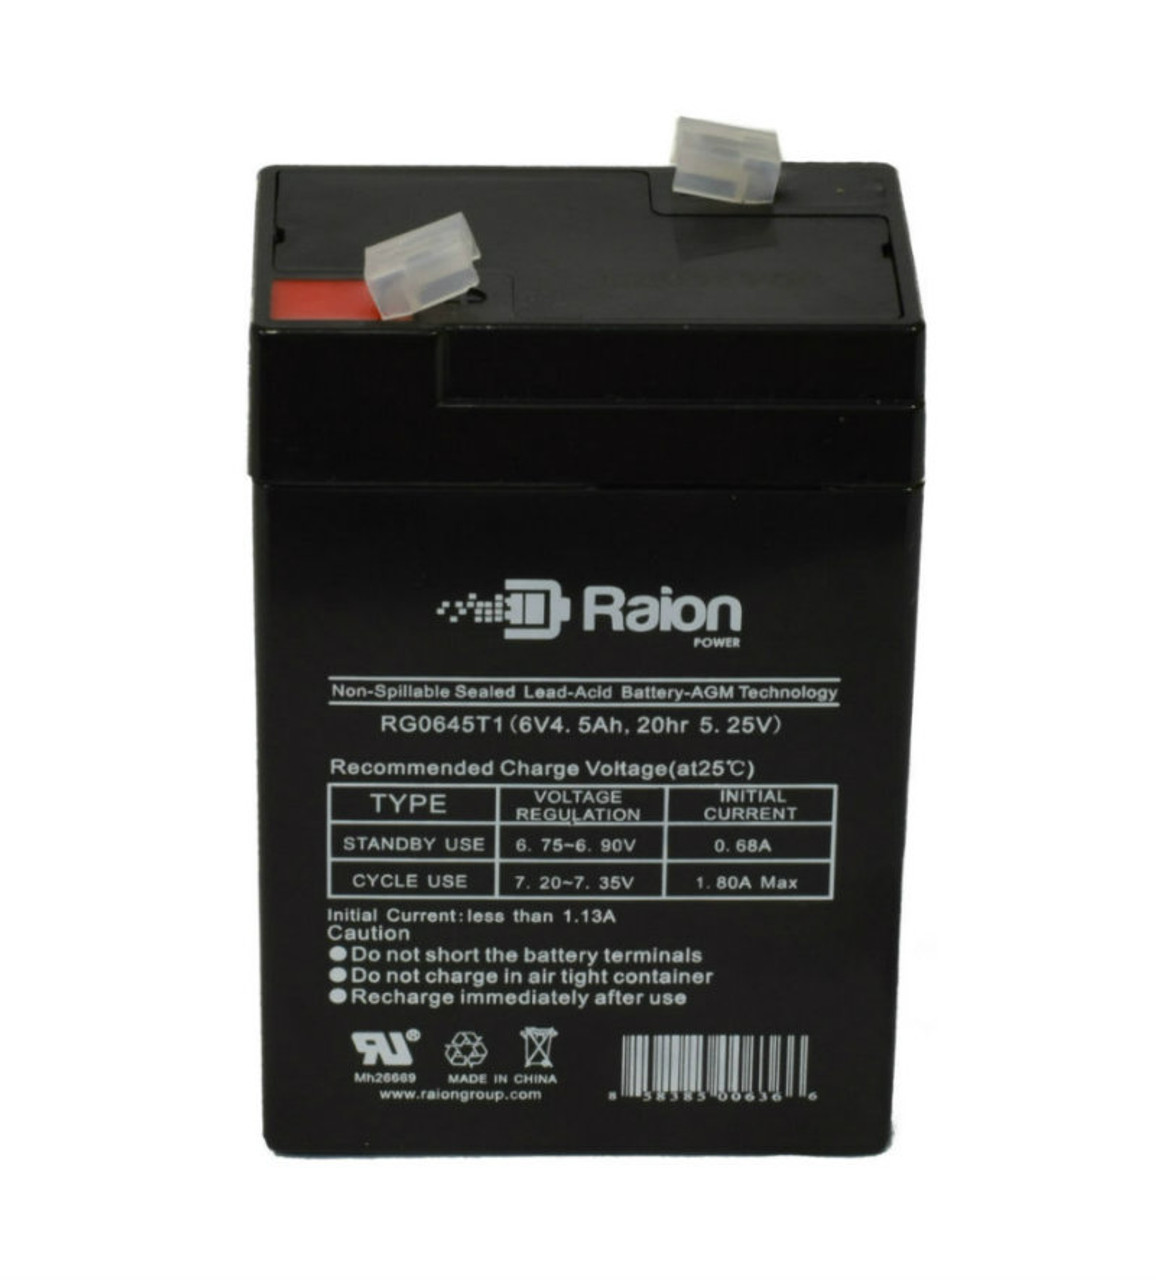 Raion Power RG0645T1 Replacement Battery Cartridge for Duracell DURA6-5F